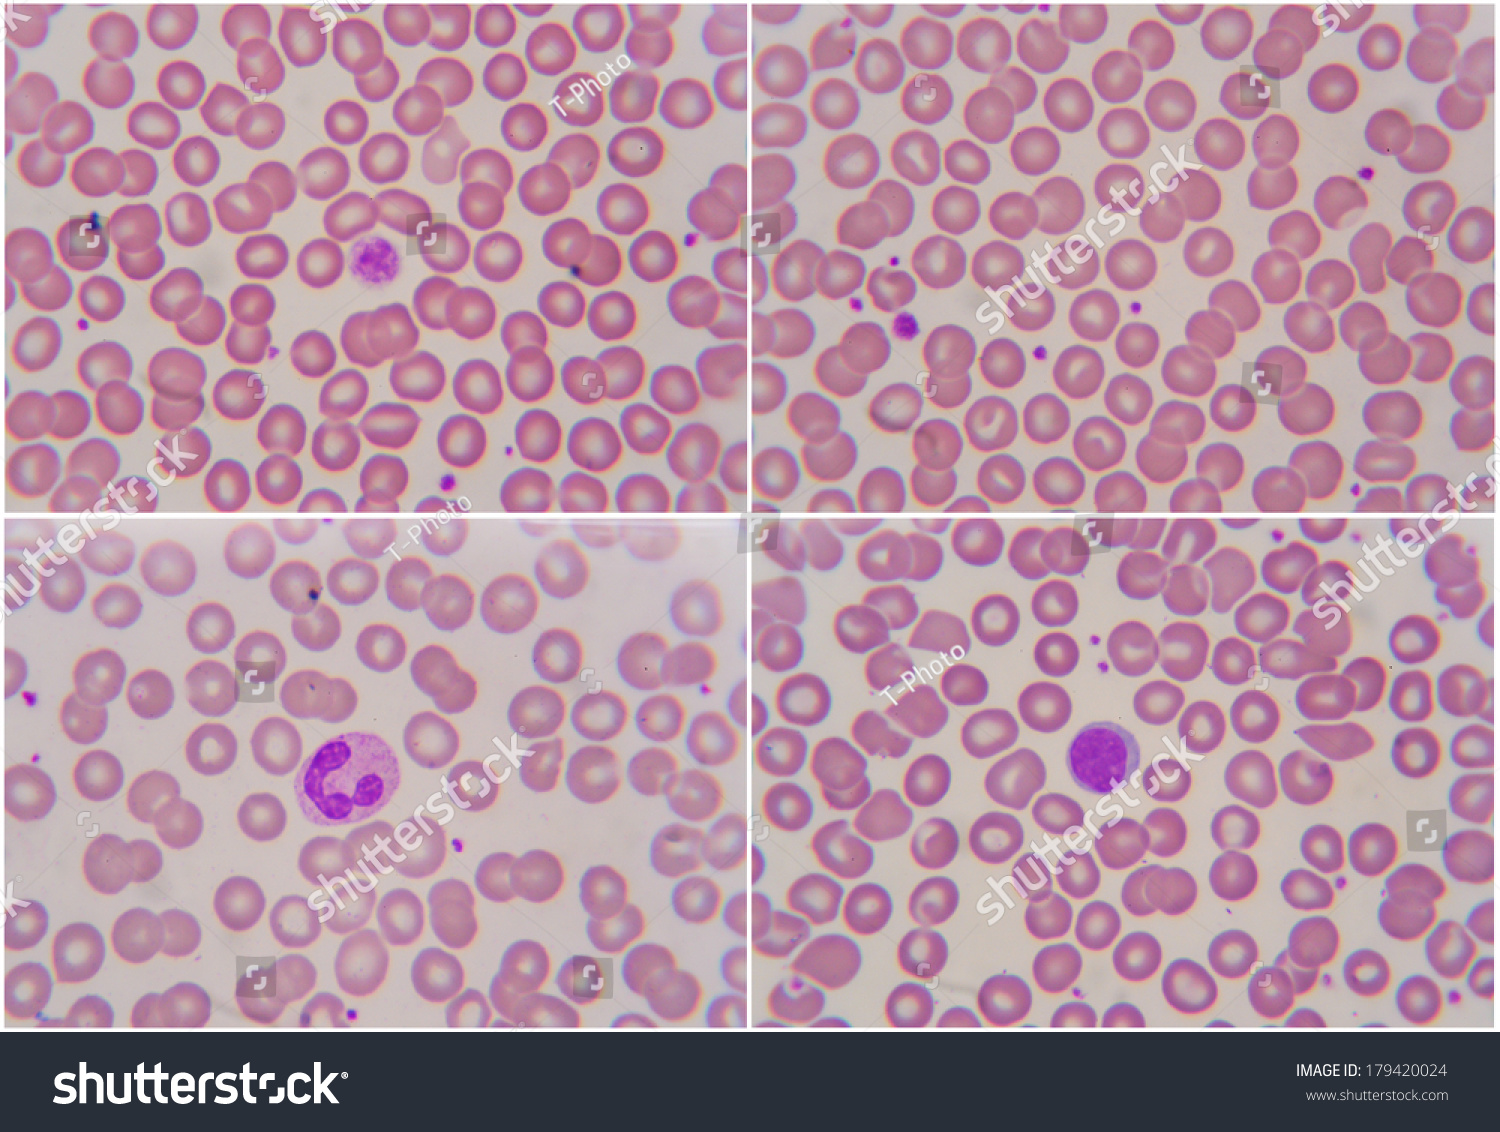 Human Blood Cell Under Microscope Stock Photo 179420024 : Shutterstock